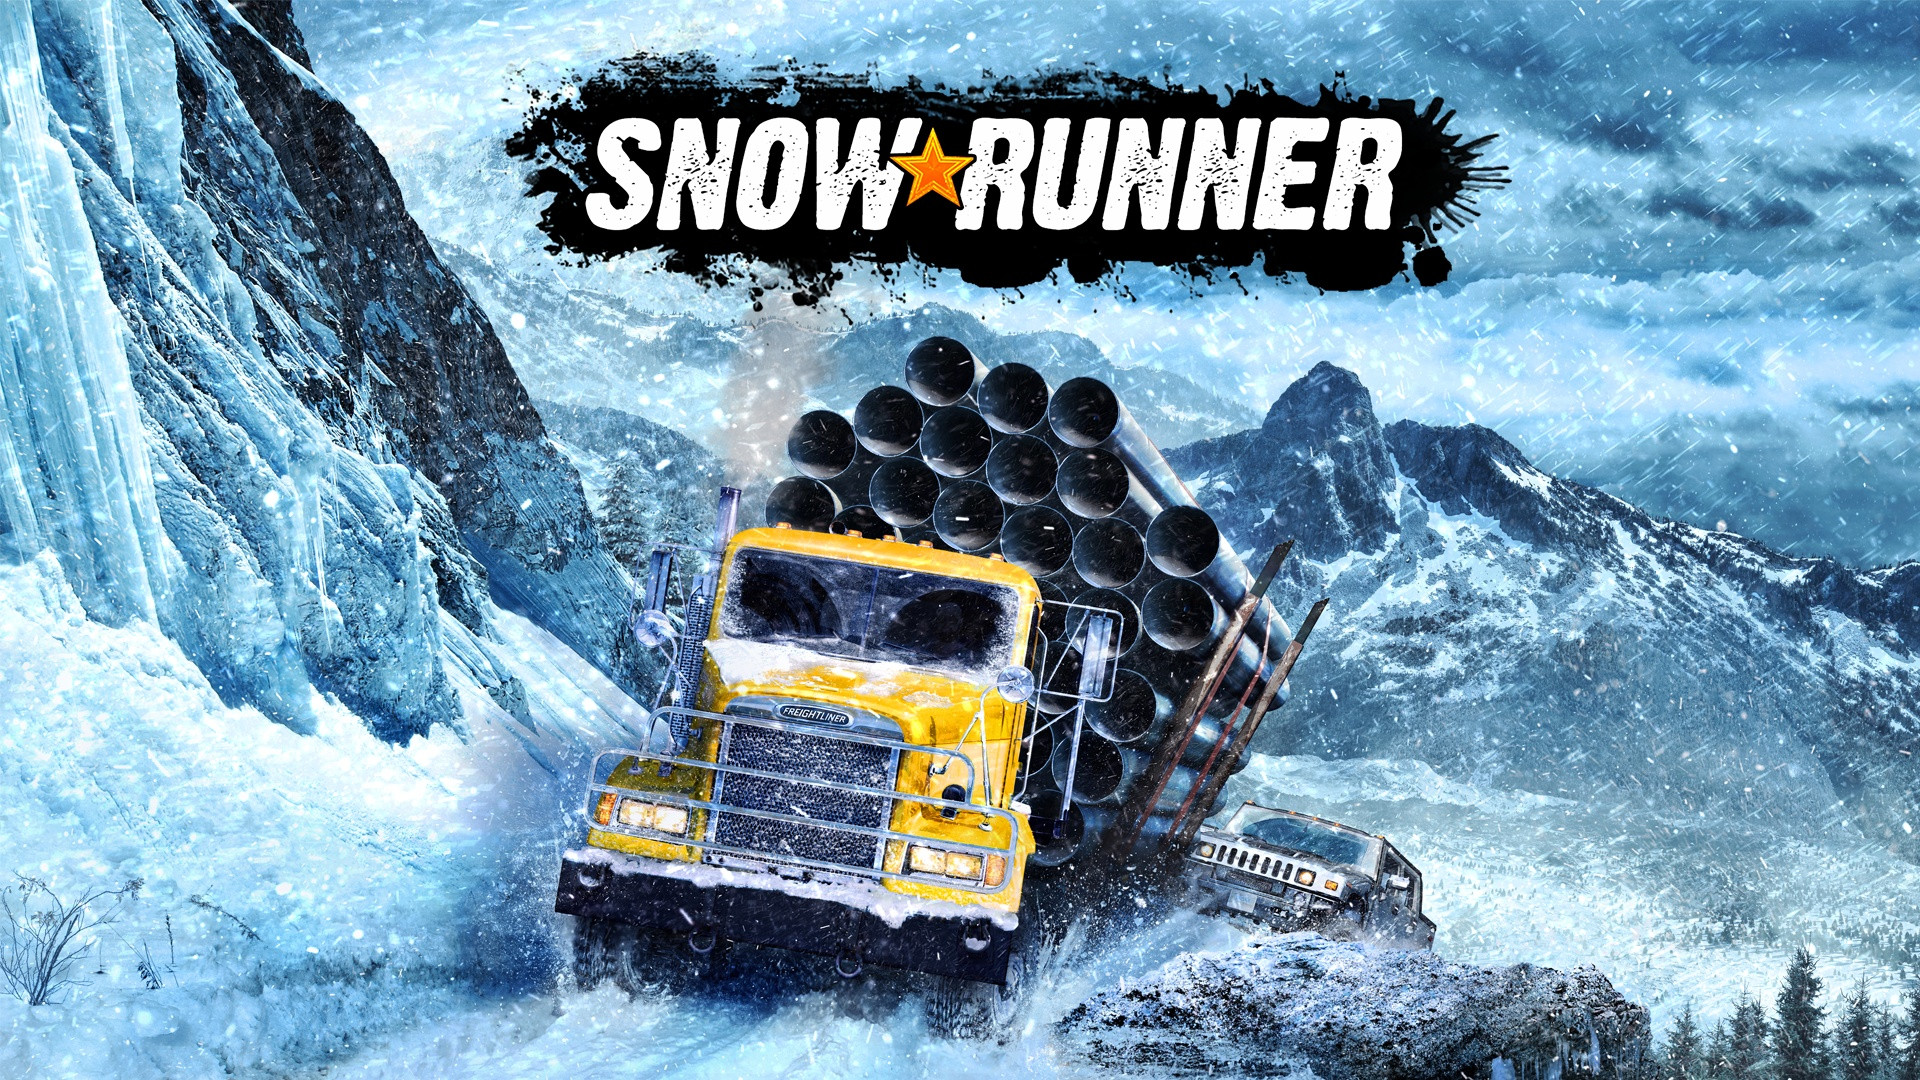 Take on the Wildest Landscapes in SnowRunner with Your Very Own Customized Vehicle